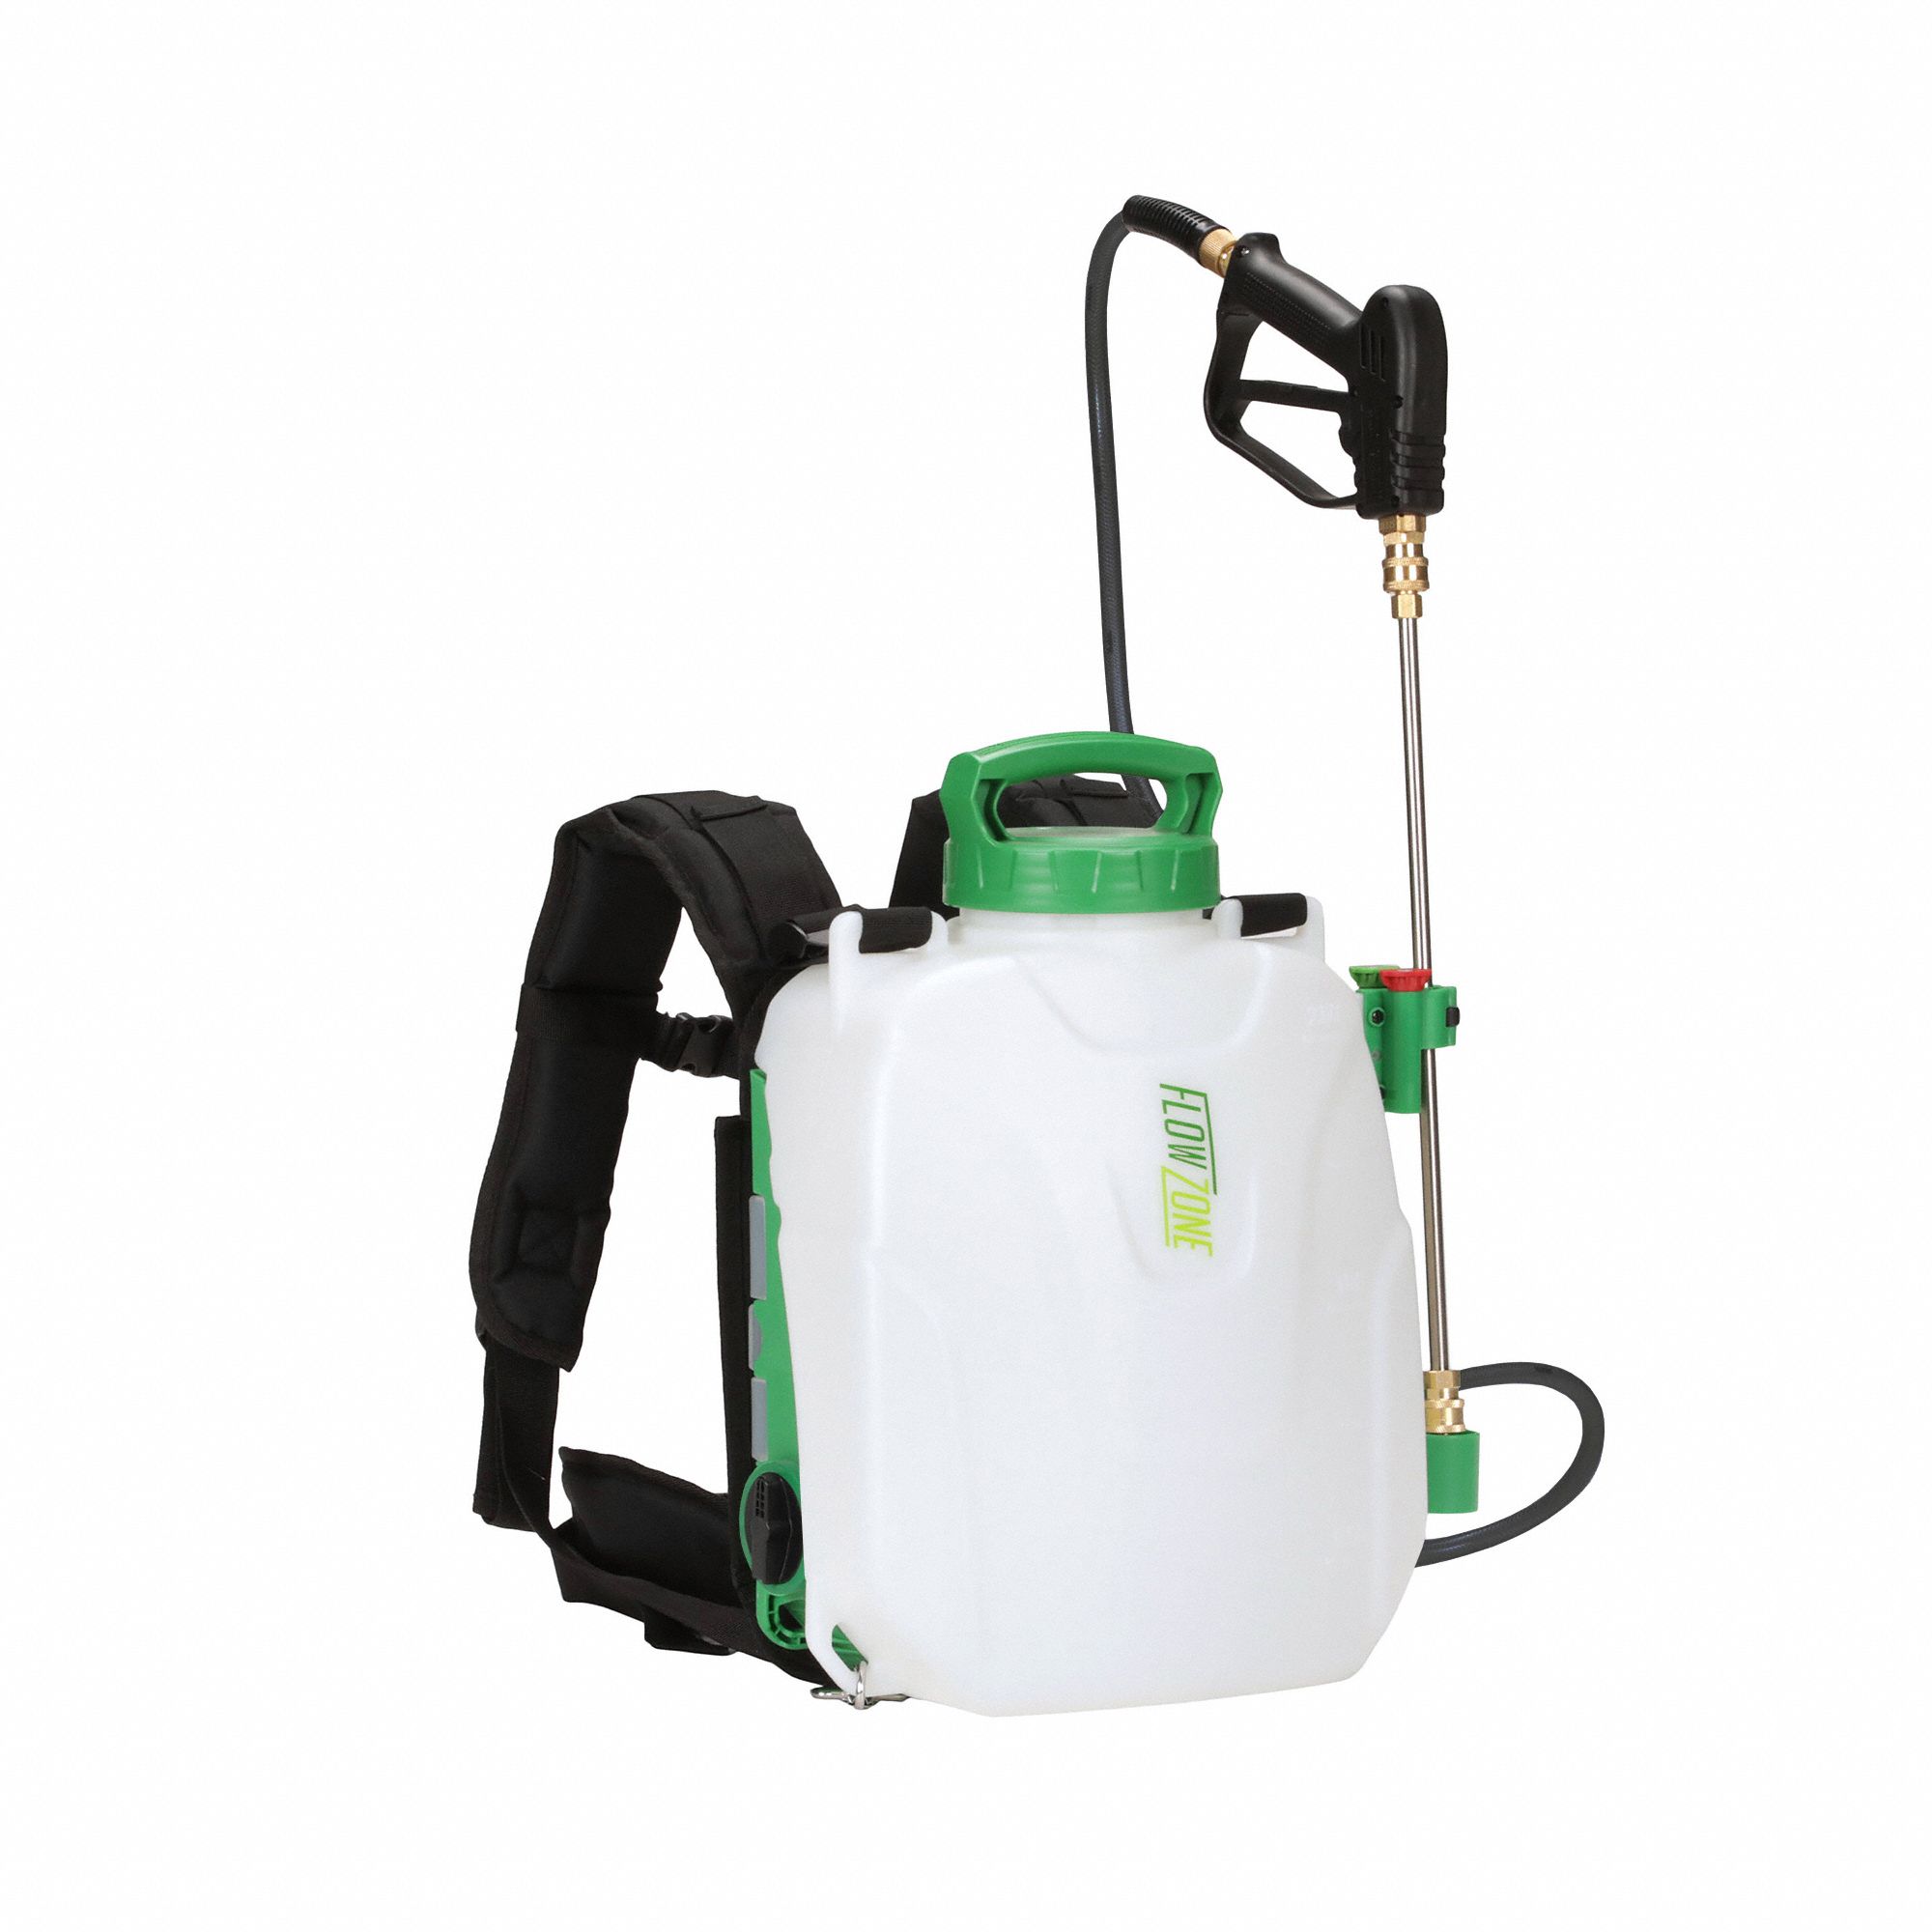 FlowZone(R) Storm(TM)-2.5 Variable Pressure 5-Position Lithium-Ion Battery Powered Backpack Sprayer 